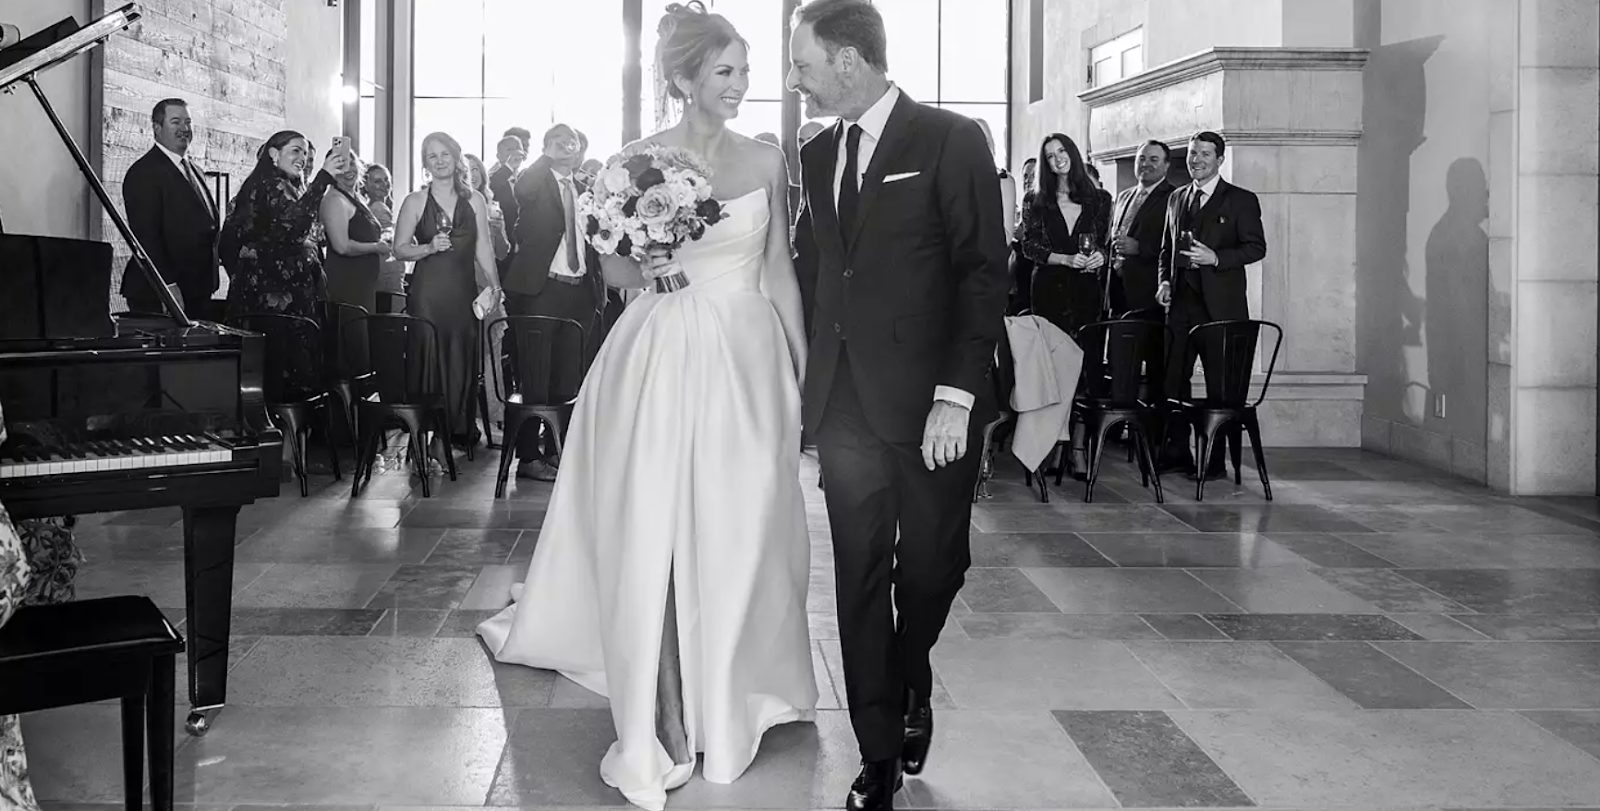 Chris Harrison, Former Host of ‘The Bachelor,’ Ties the Knot with Lauren Zima